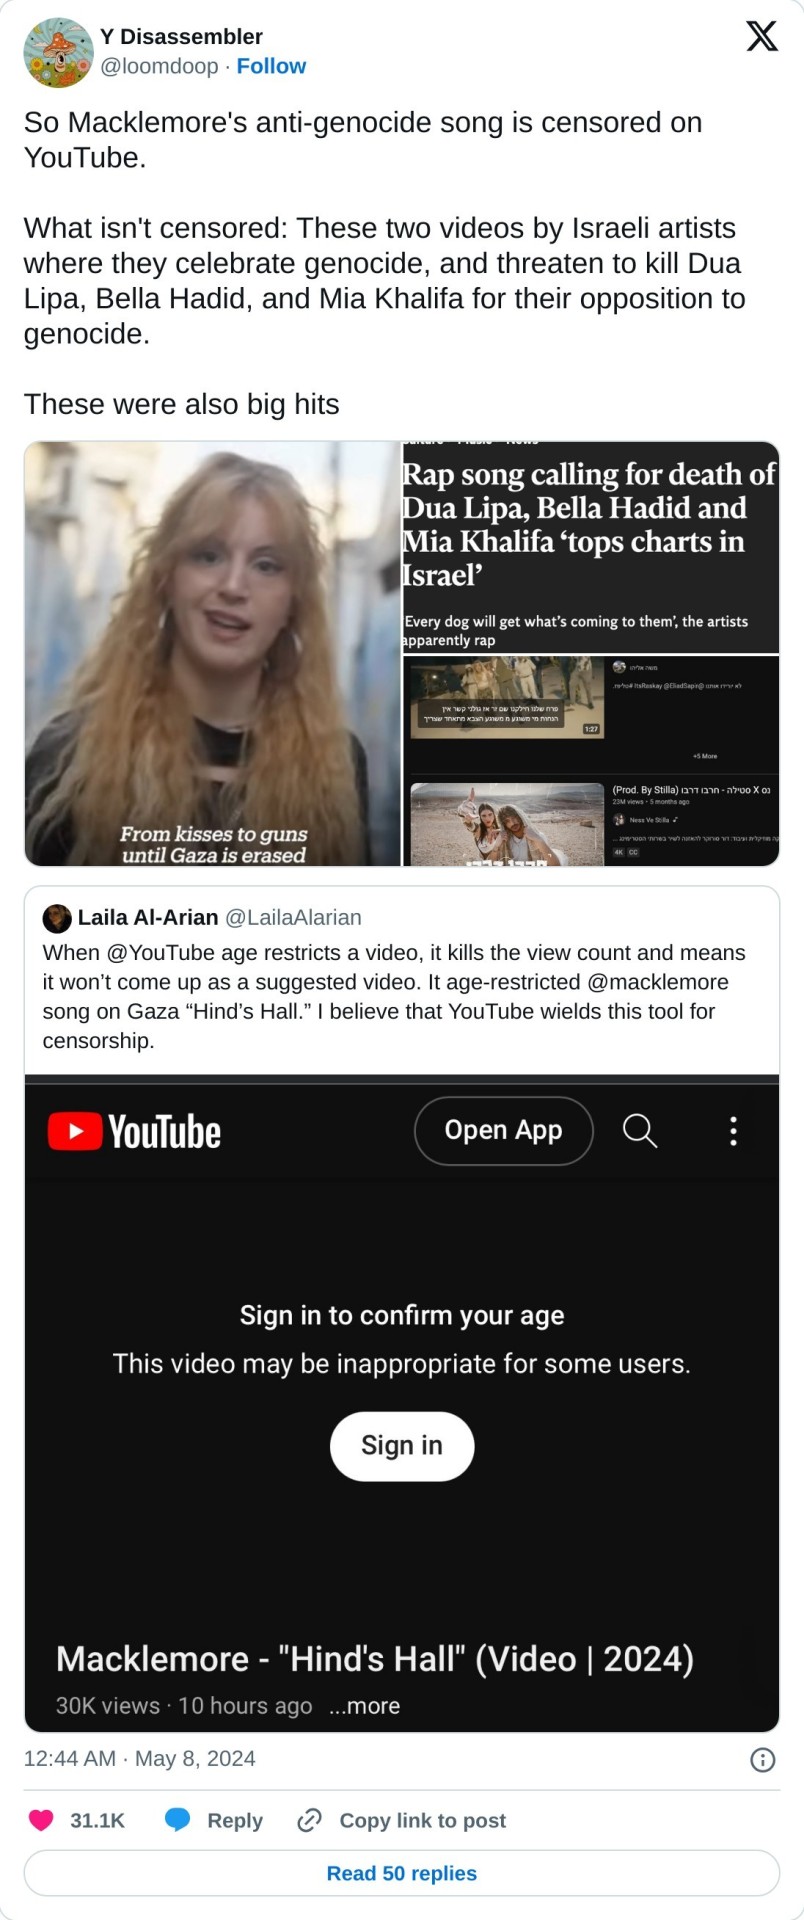 So Macklemore's anti-genocide song is censored on YouTube.   What isn't censored: These two videos by Israeli artists where they celebrate genocide, and threaten to kill Dua Lipa, Bella Hadid, and Mia Khalifa for their opposition to genocide.   These were also big hits https://t.co/qOr9CCt3ZU pic.twitter.com/9BebHoGx0p  — Y Disassembler (@loomdoop) May 8, 2024